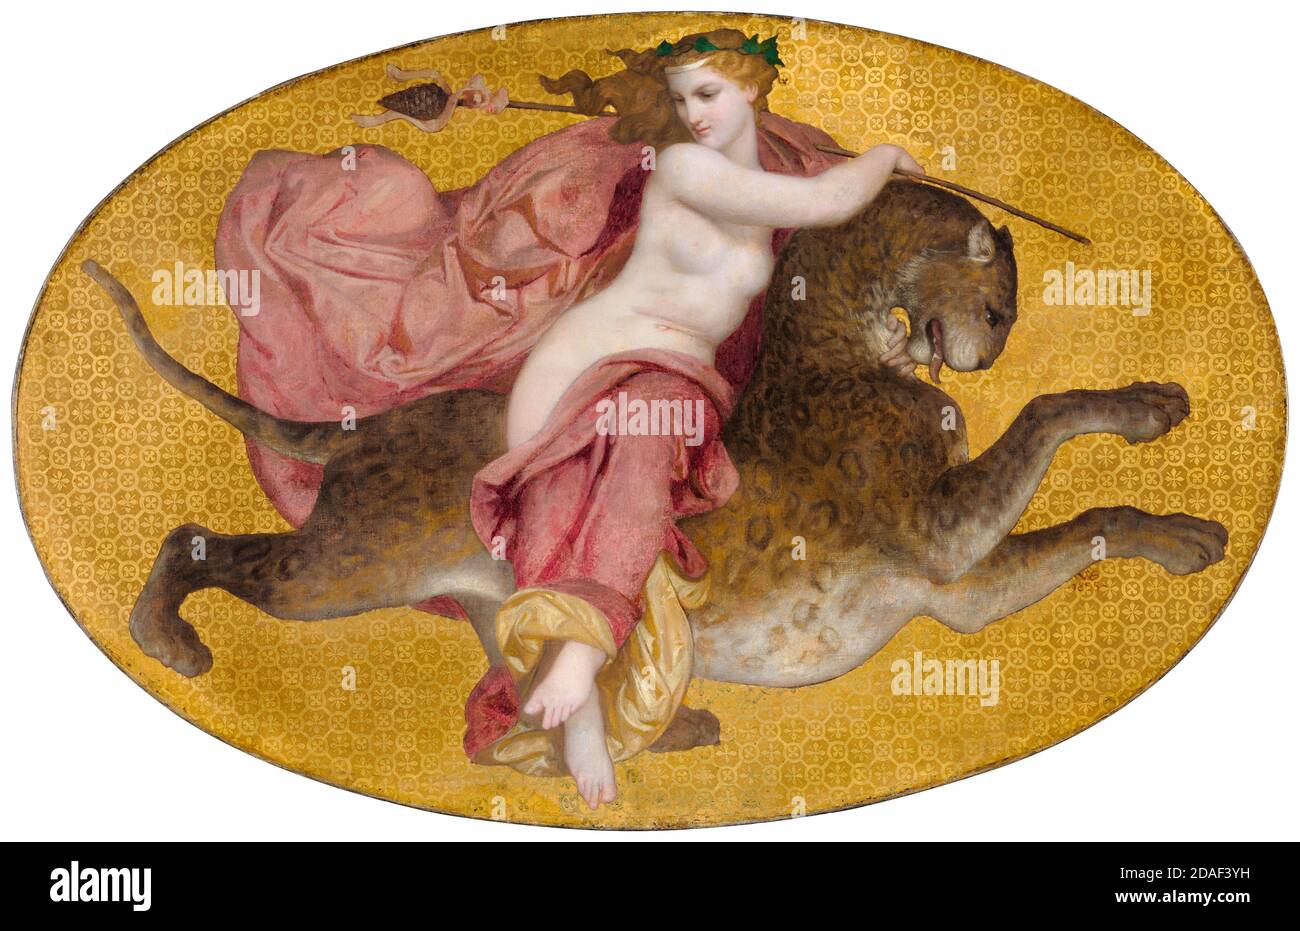 William Adolphe Bouguereau, Bacchante on a Panther, painting, 1855 Stock Photo